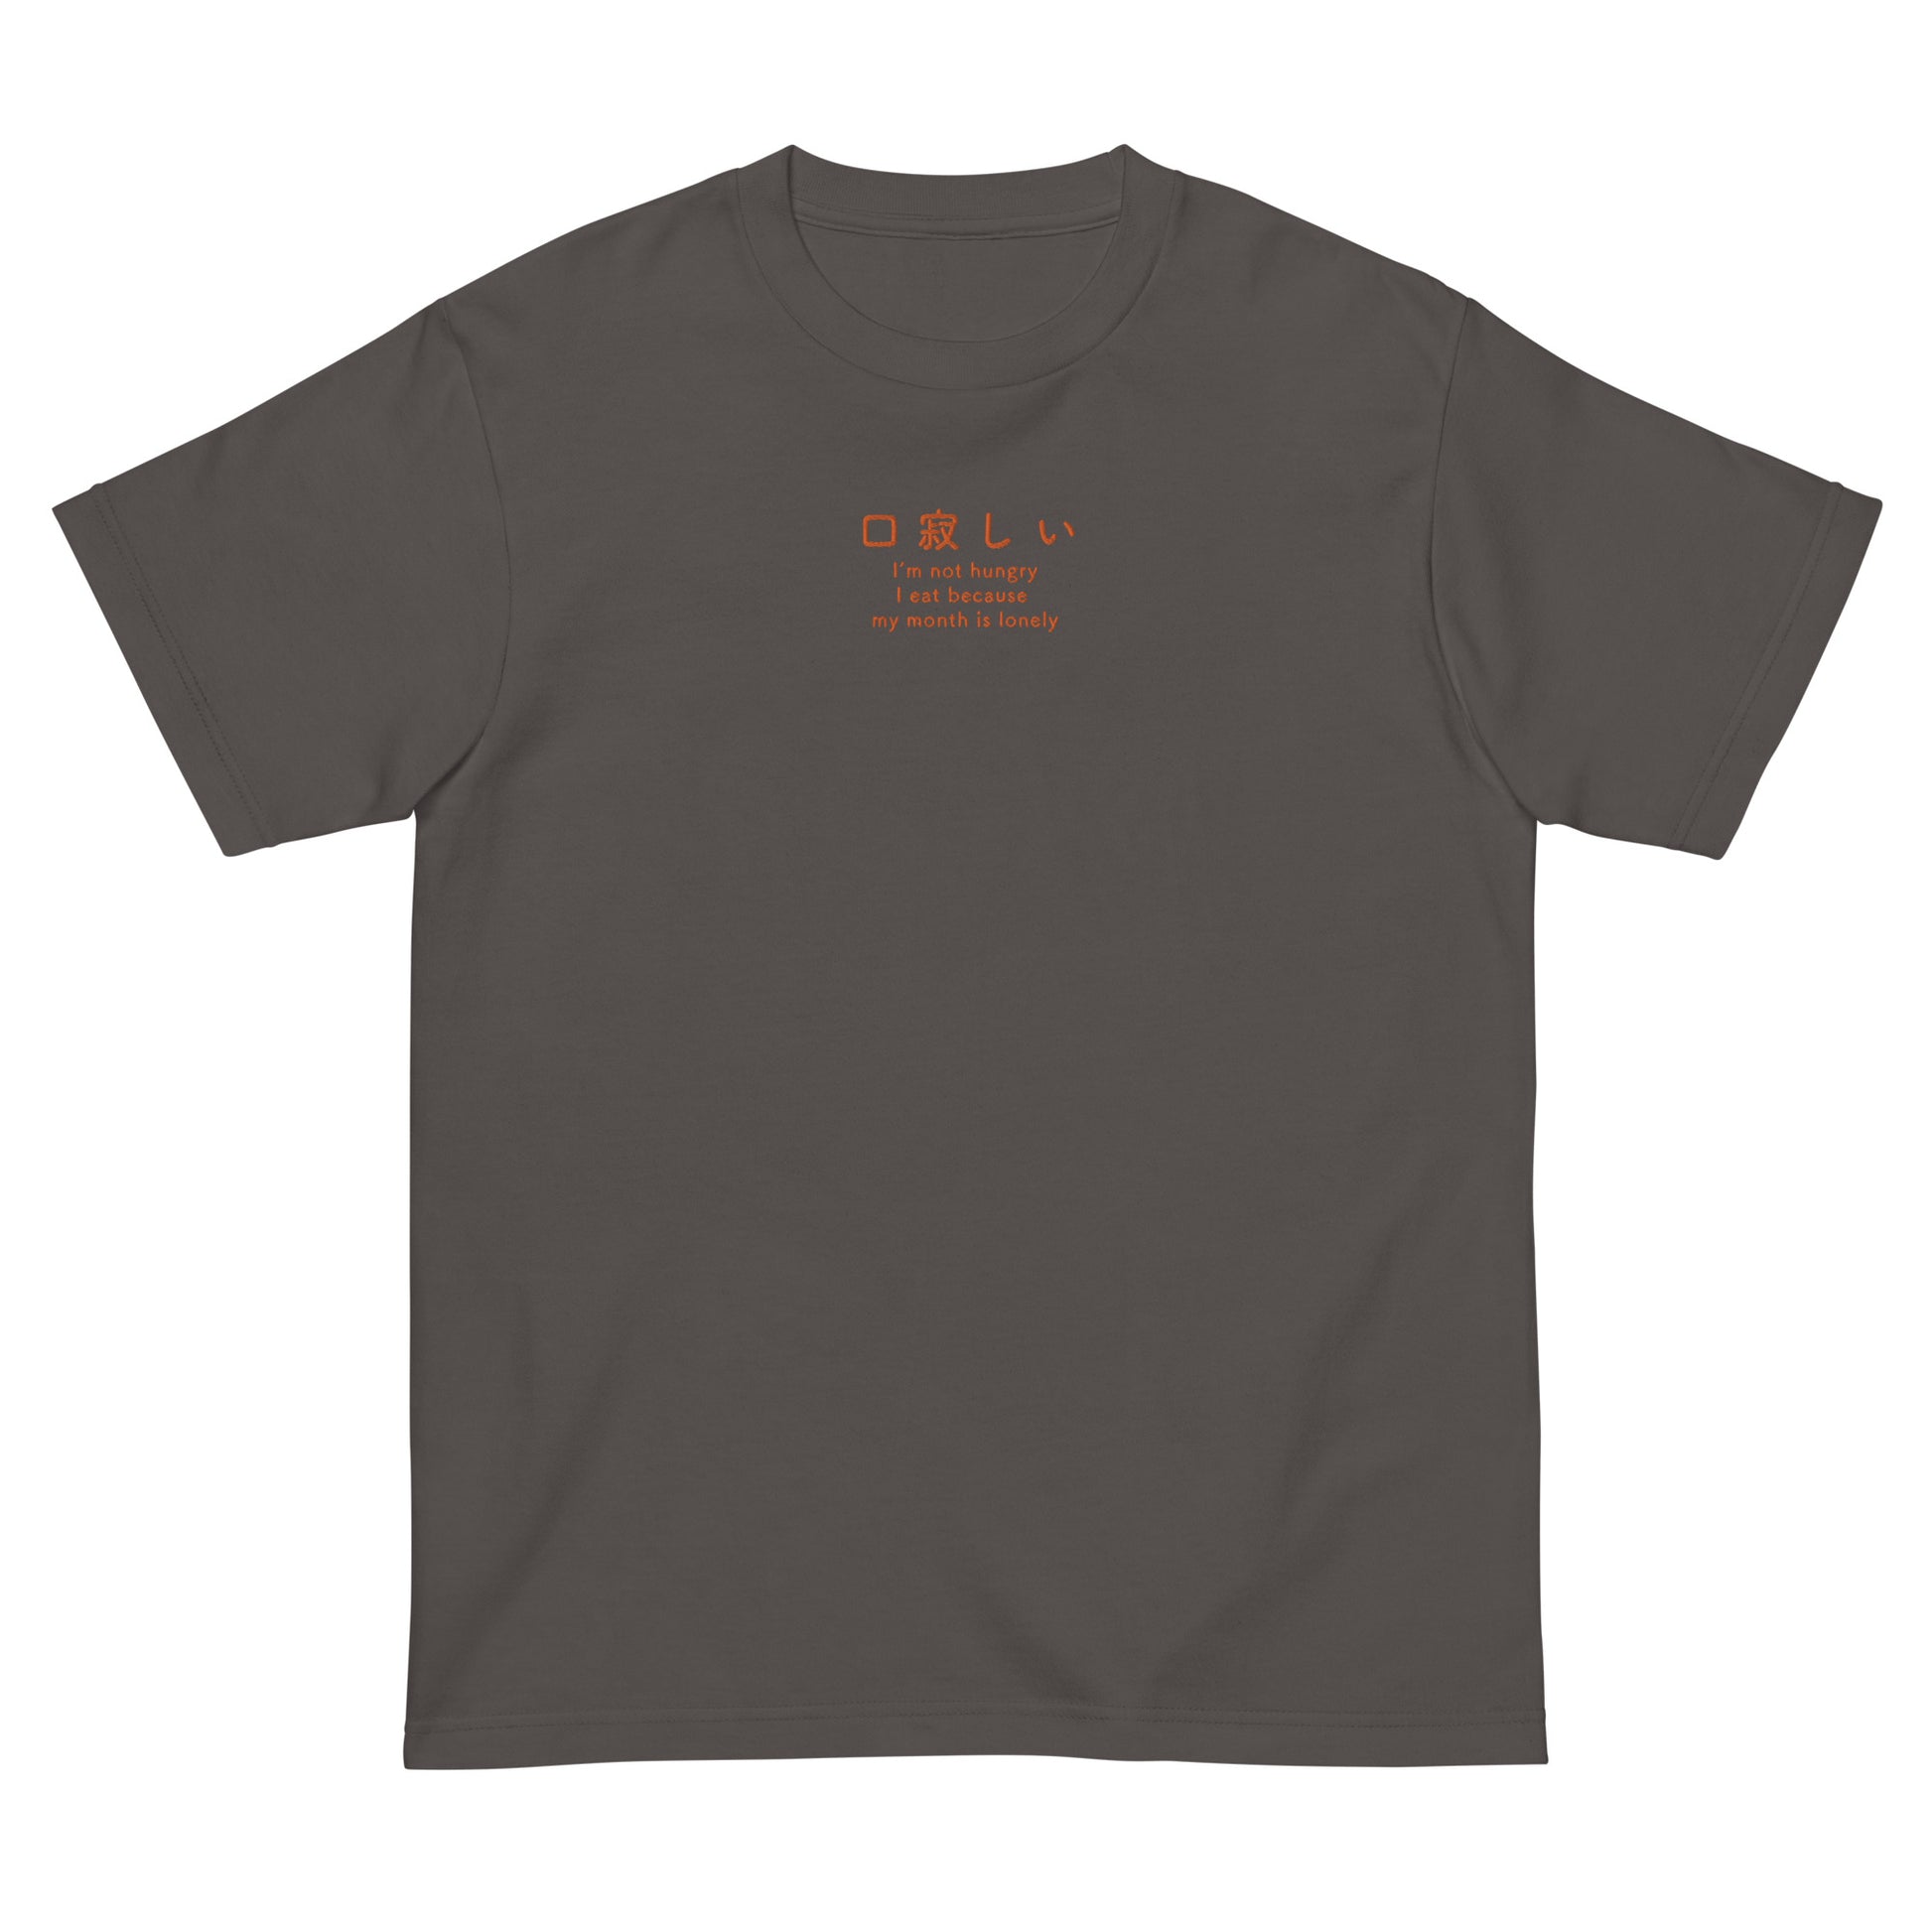 Dark Gray High Quality Tee - Front Design with an Orange Embroidery "kuchisabishi" in Japanese and English